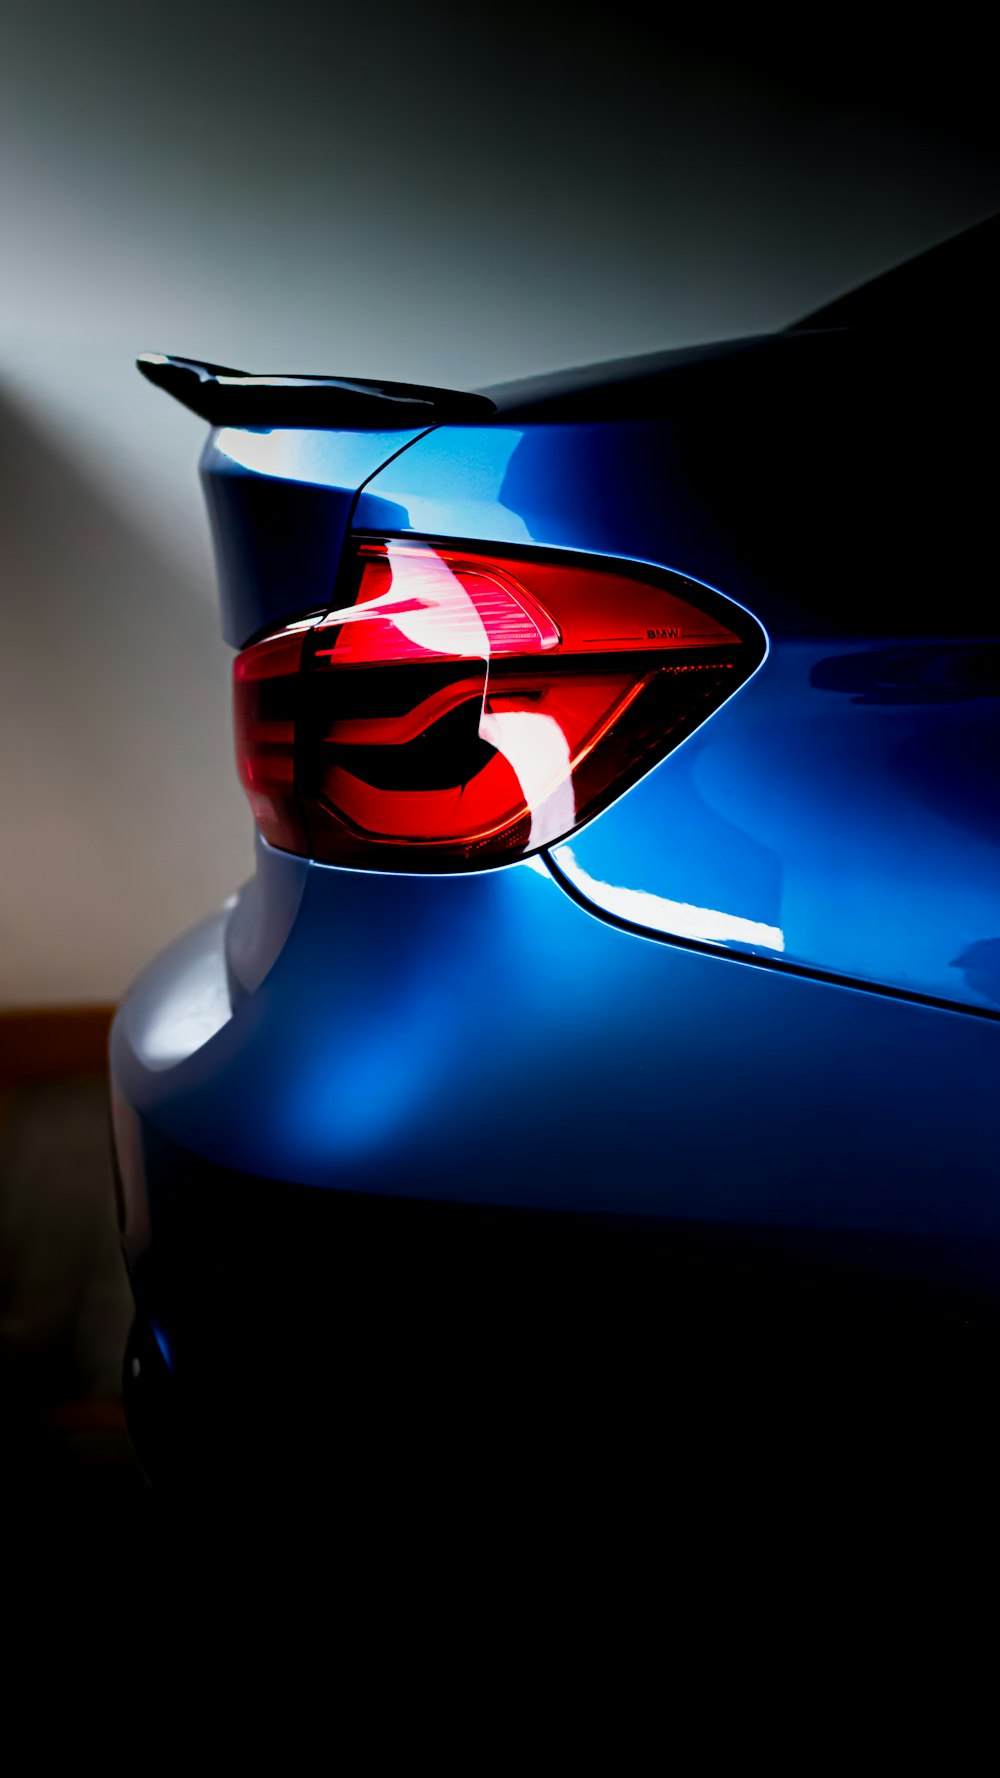 a close up of the tail lights of a blue car